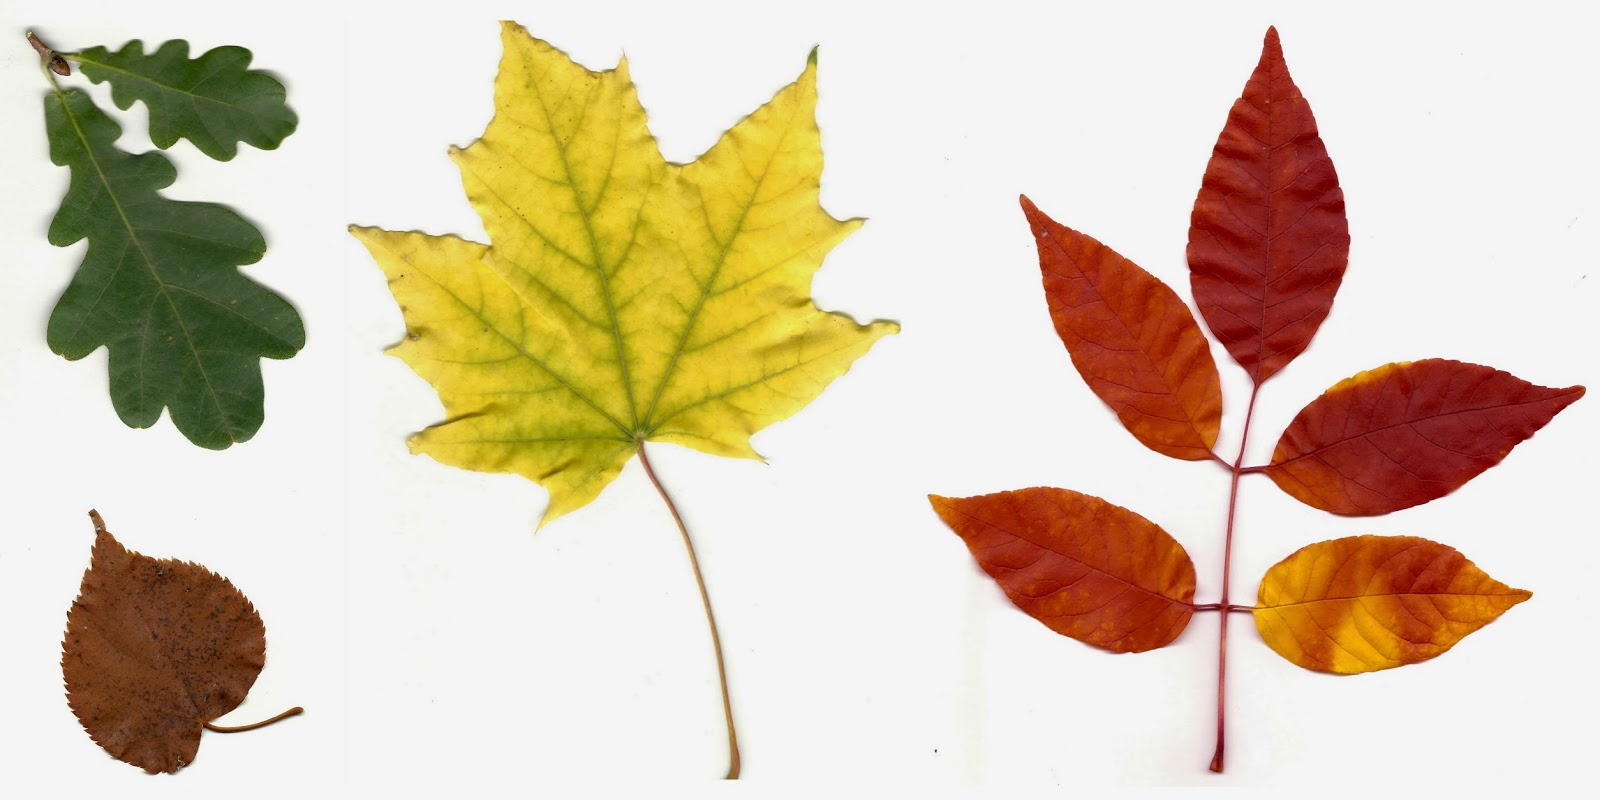 CO-Horts: The Science behind Autumn Leaf Colors